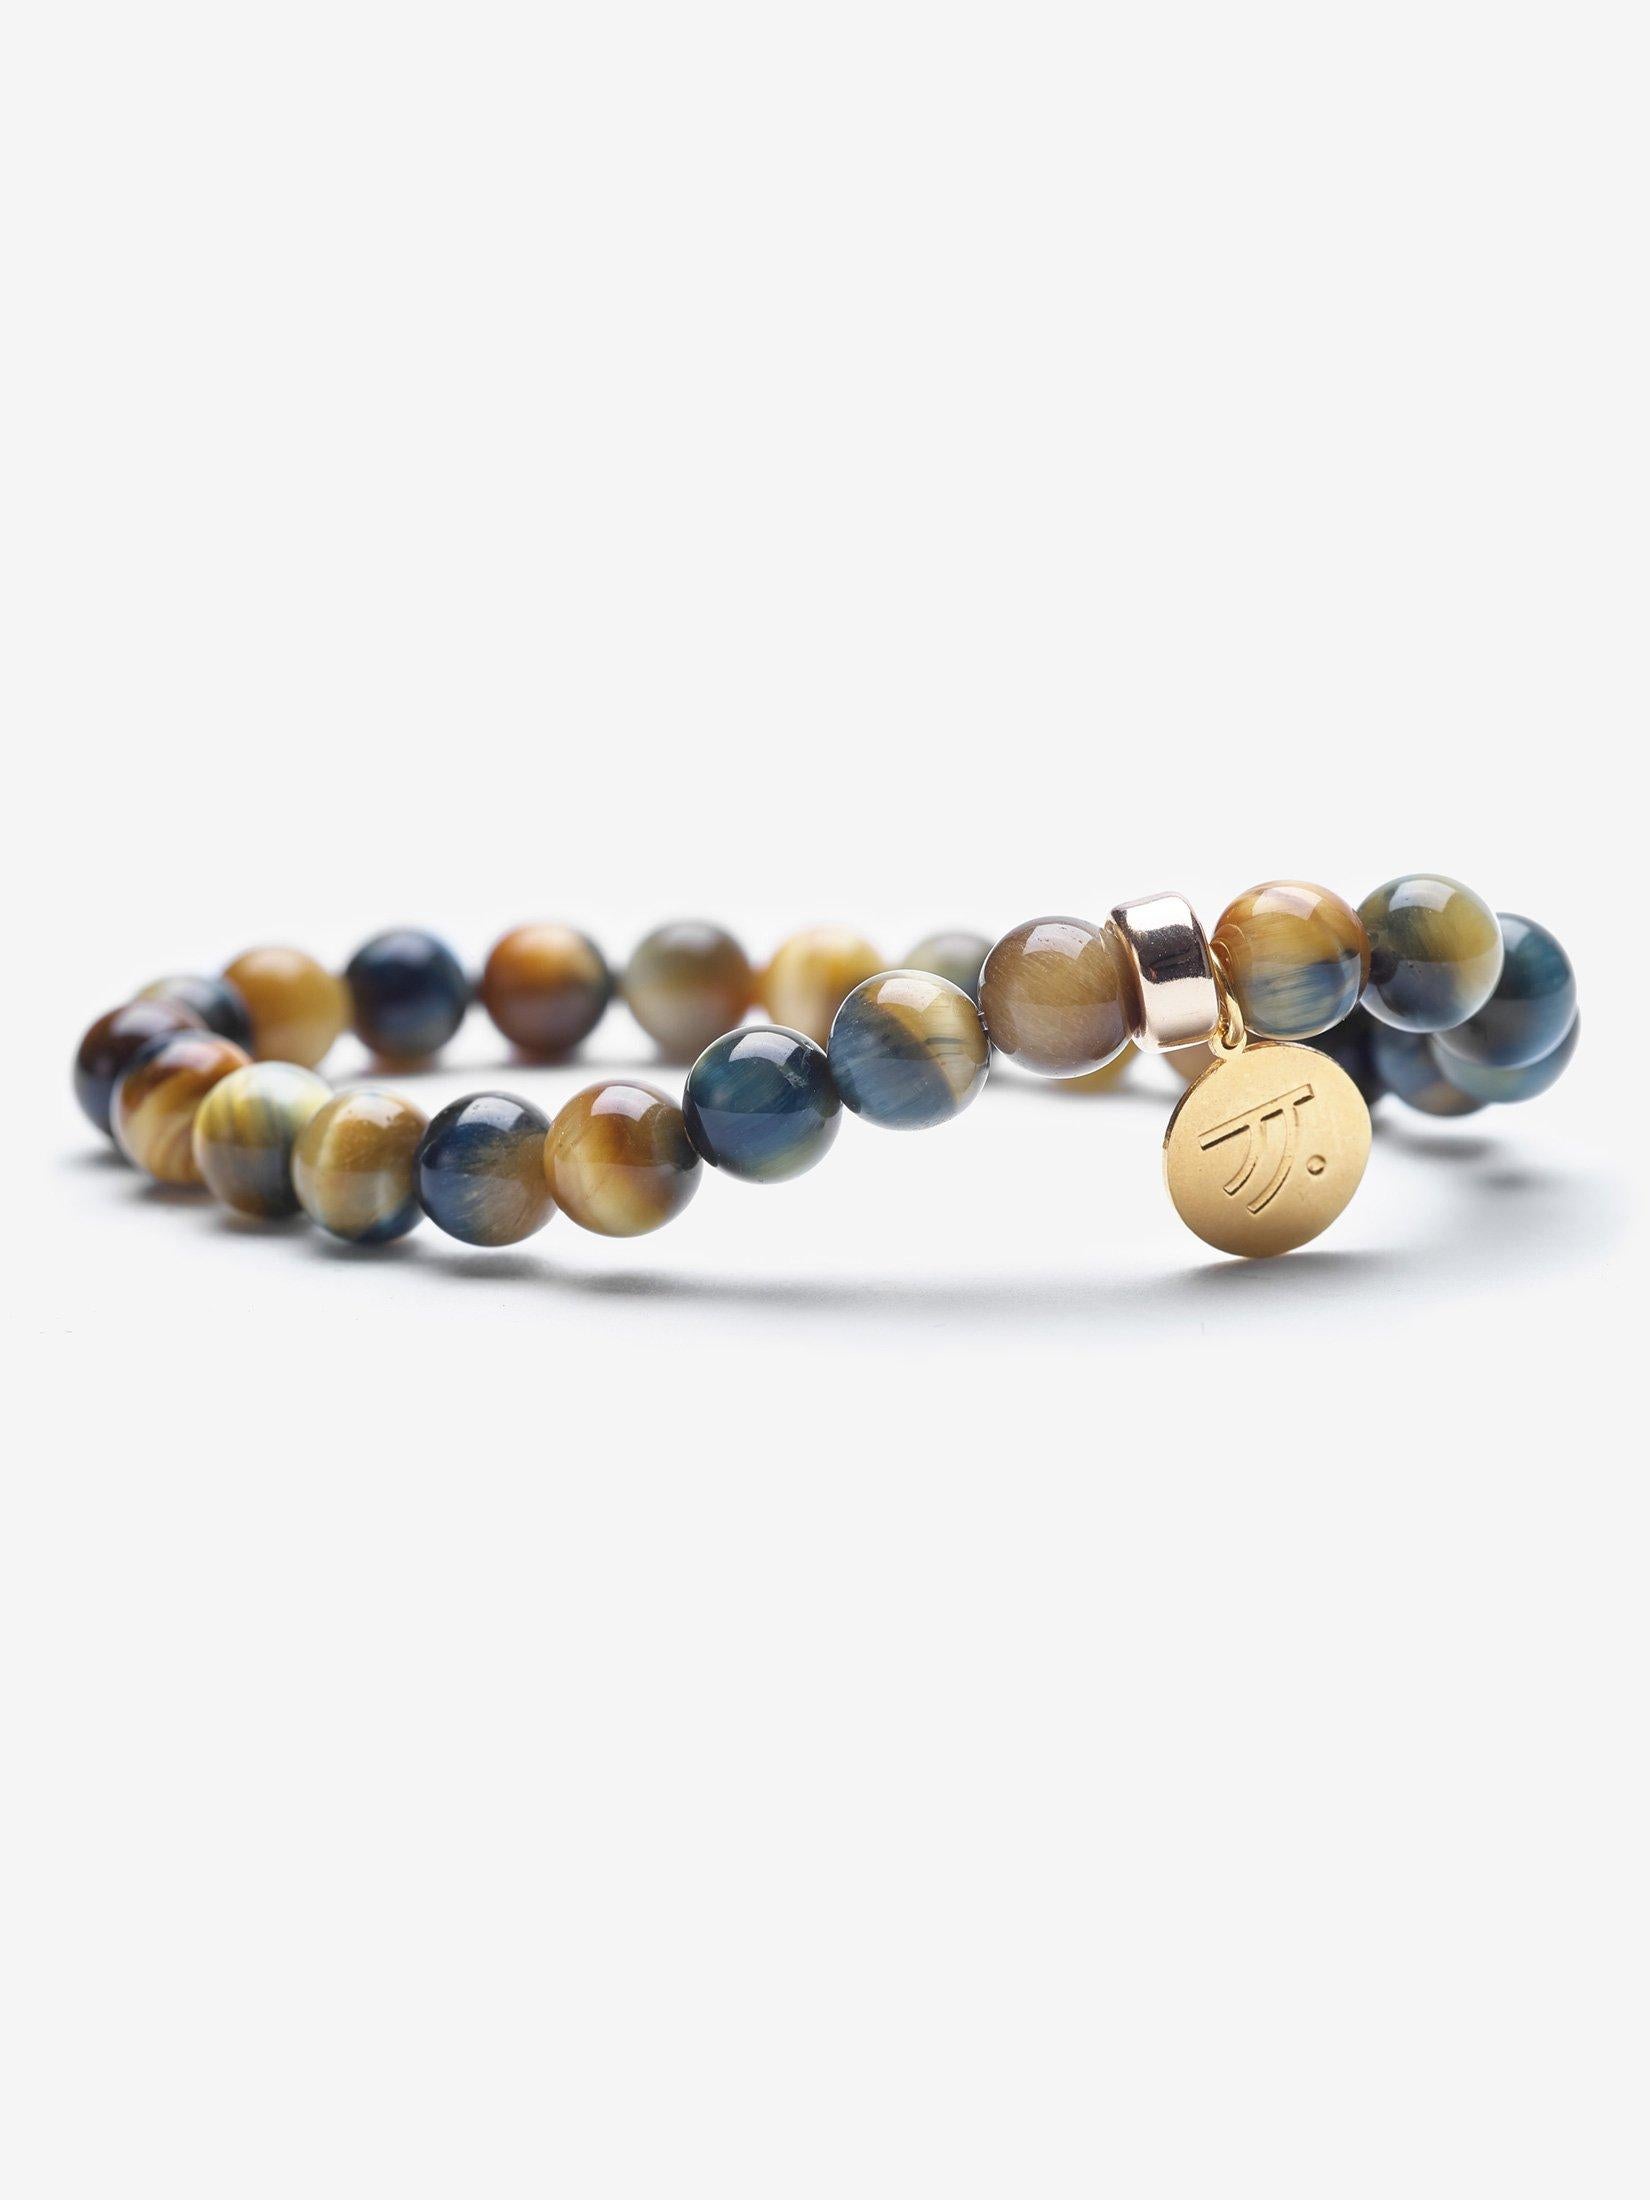 Yellow blue tiger's eye is a mesmerizing stone filled with rich hues of golden yellow and midnight blue. The golden honey colors and deep blue represent courage.  Tiger's eye is a stone of protection.

Materials
Golden Blue Tiger's Eye, 14K Gold